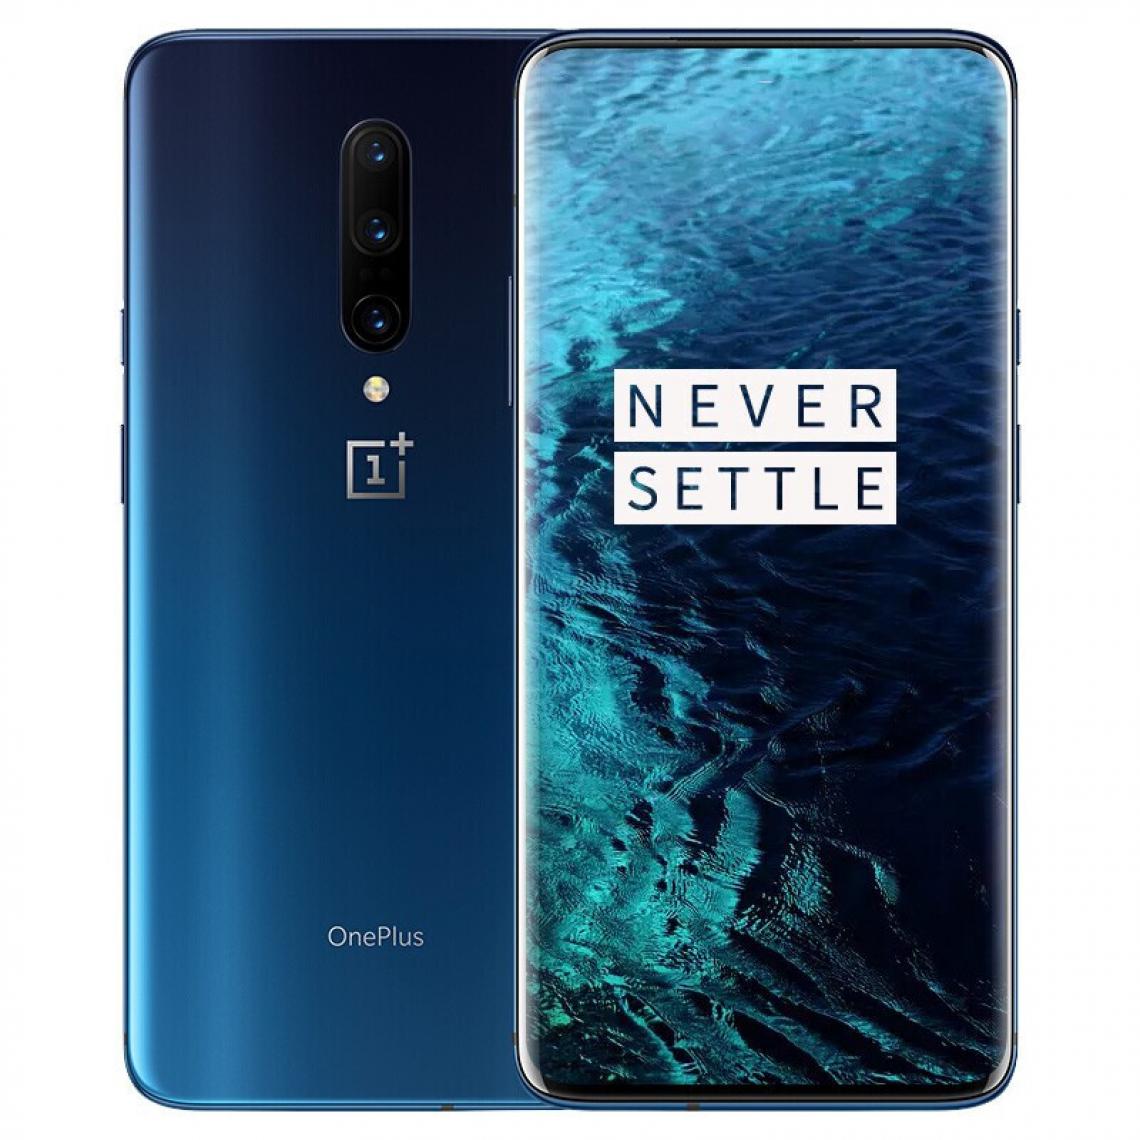 Oneplus - OnePlus 7 Pro - Smartphone Android